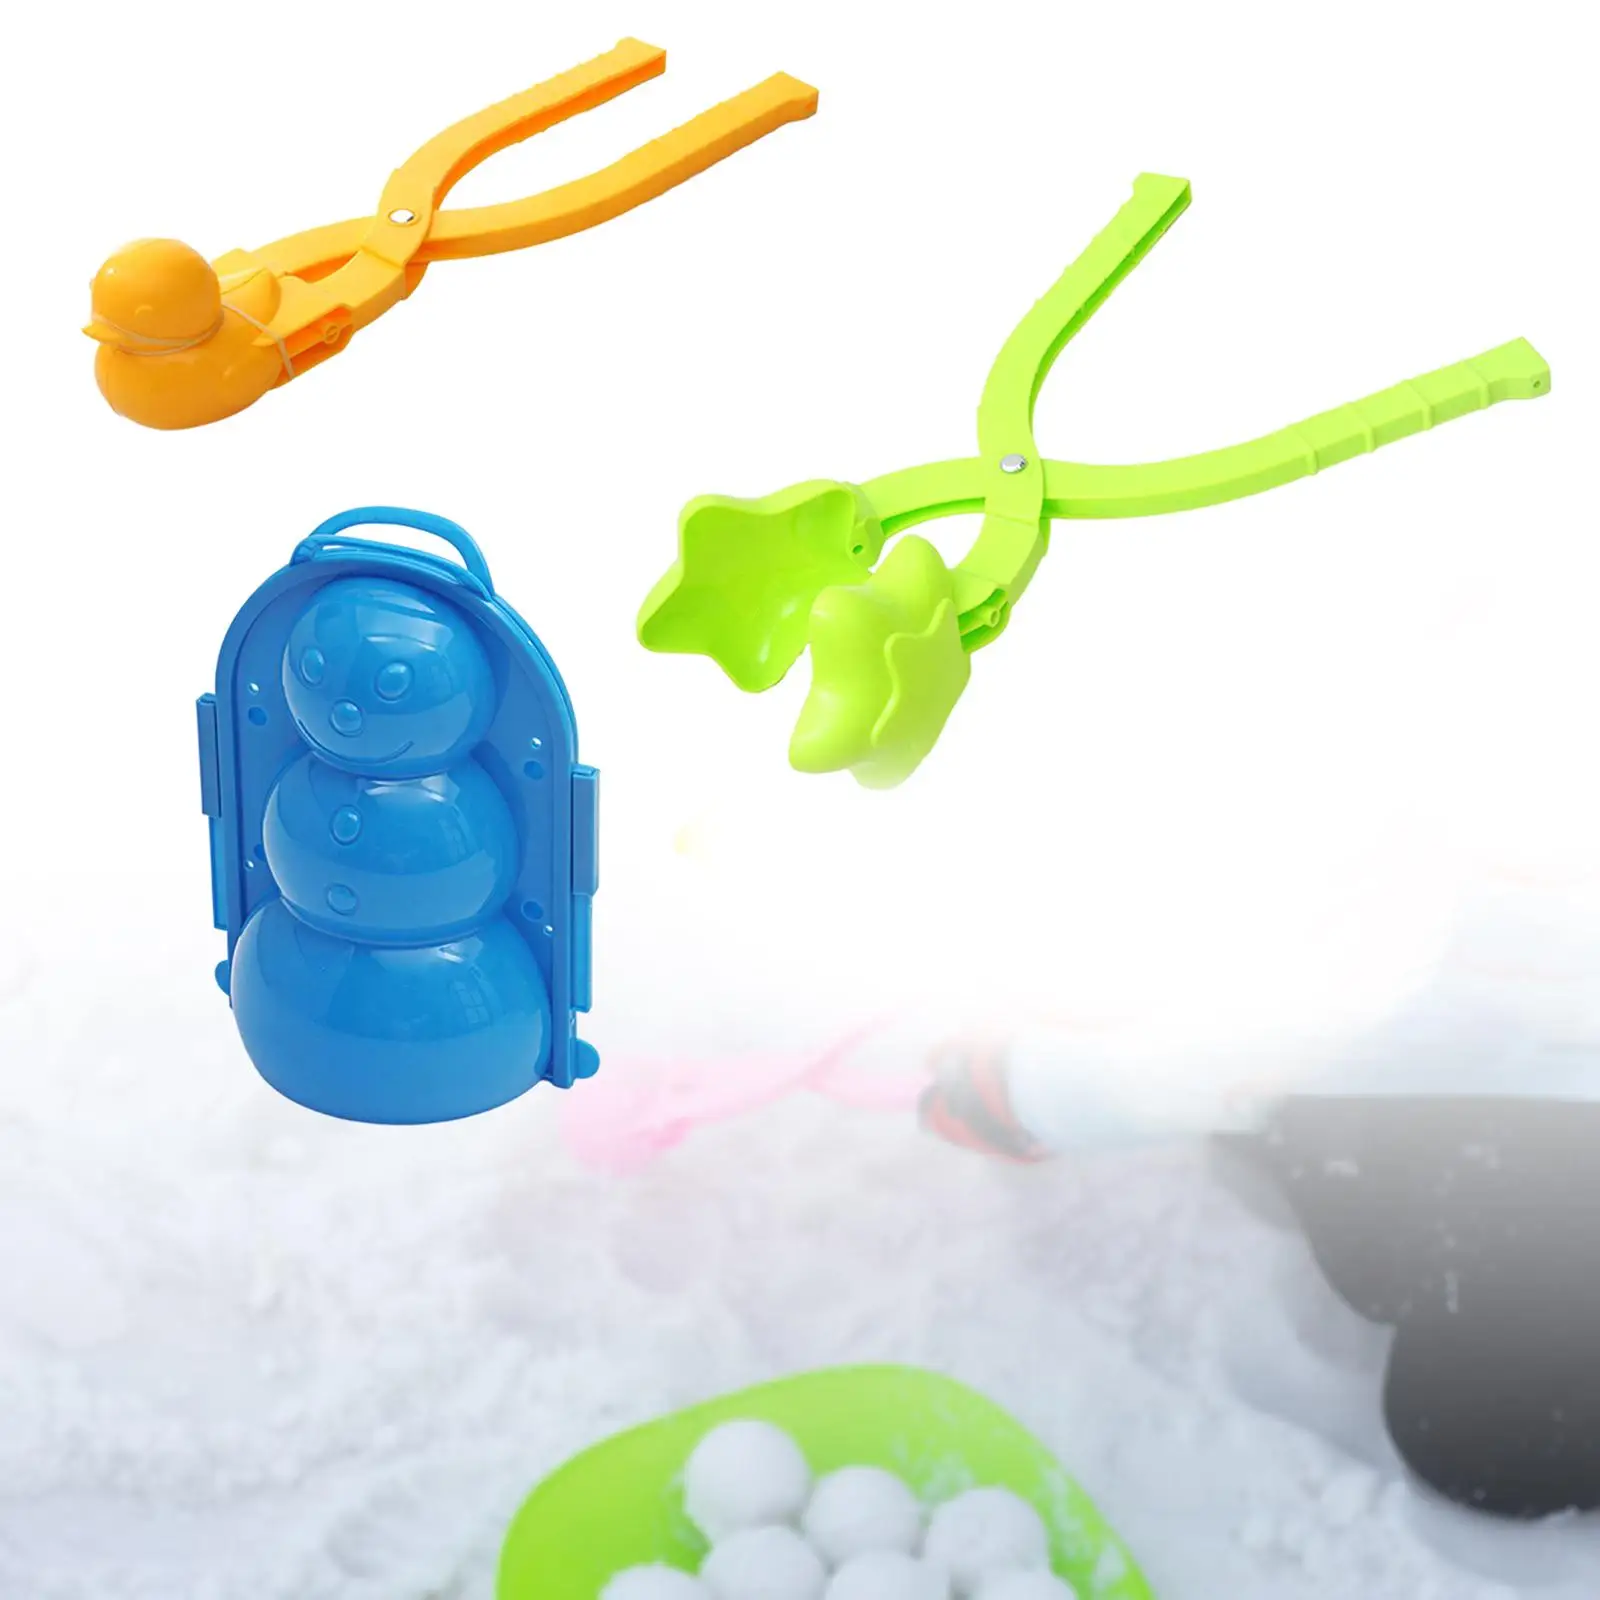 Cartoon Snowball Clamp Wear Resistant Snow Ball Making Tools for Outdoor Activities Winter Sports Beach Party